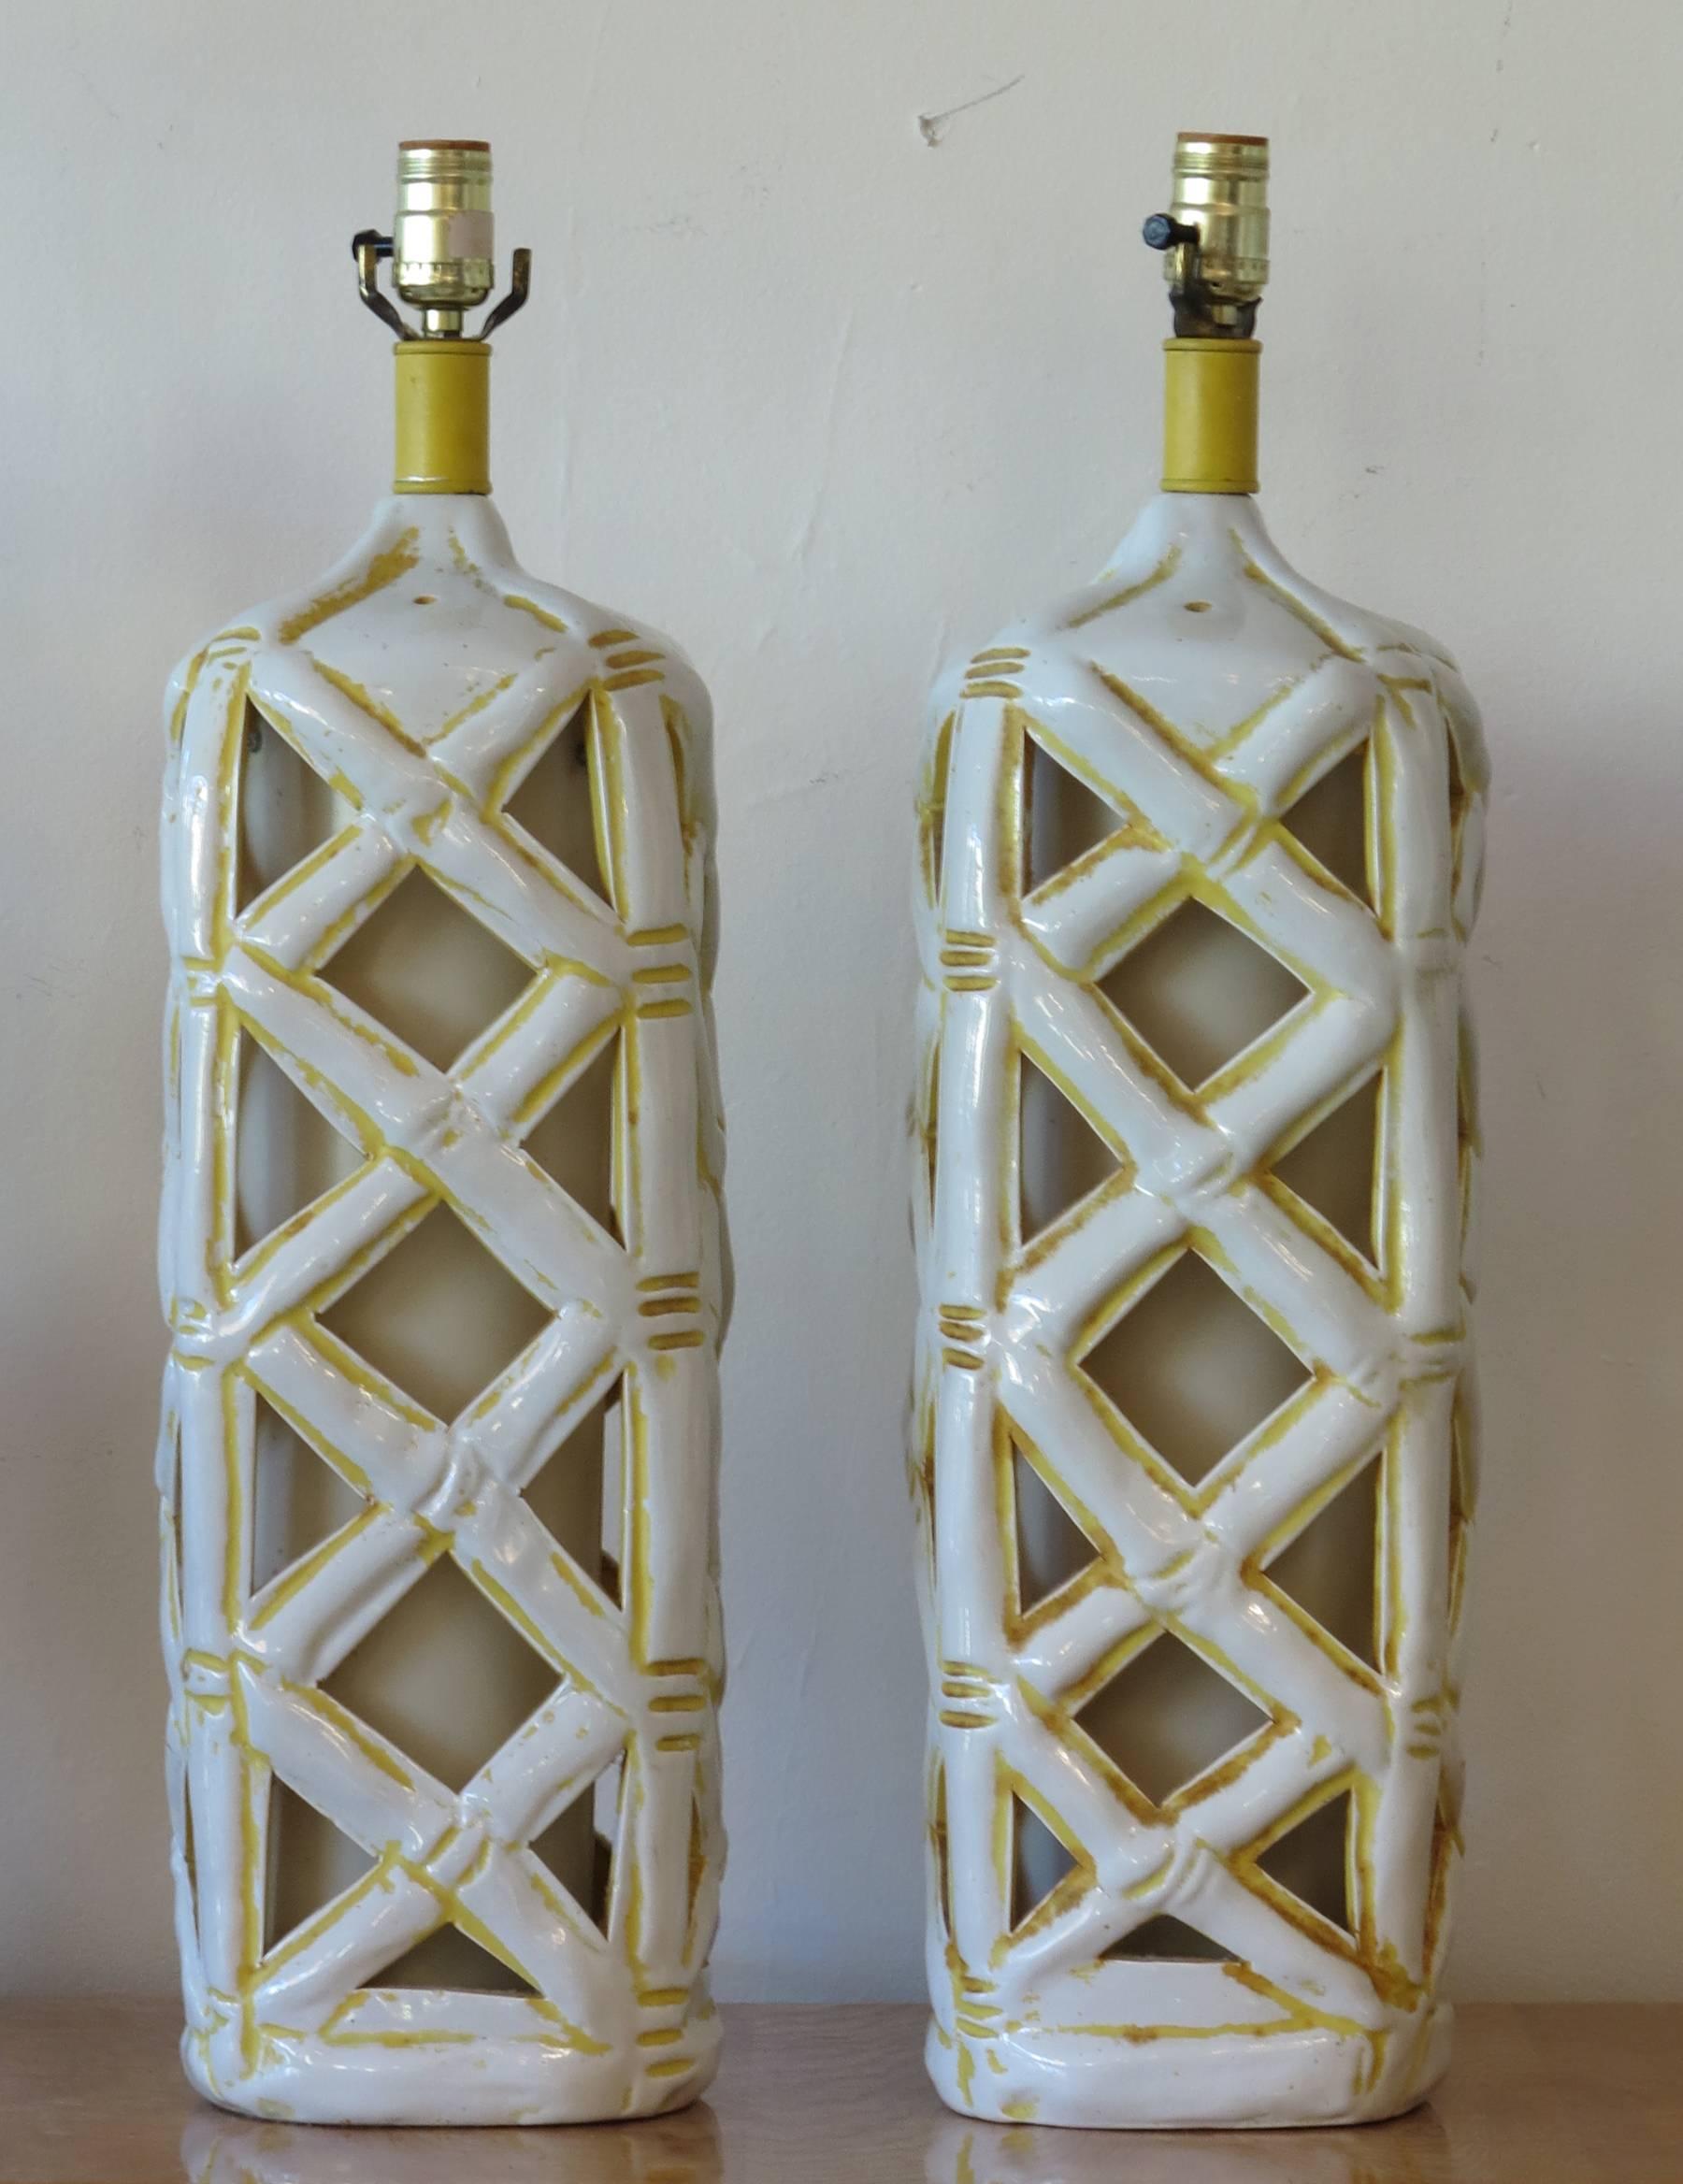 Hollywood Regency style faux bamboo ceramic lamps. 1960s Billy Baldwin Palm Beach style. Has an interior shade that lights the base. 26 inches tall to top of socket.